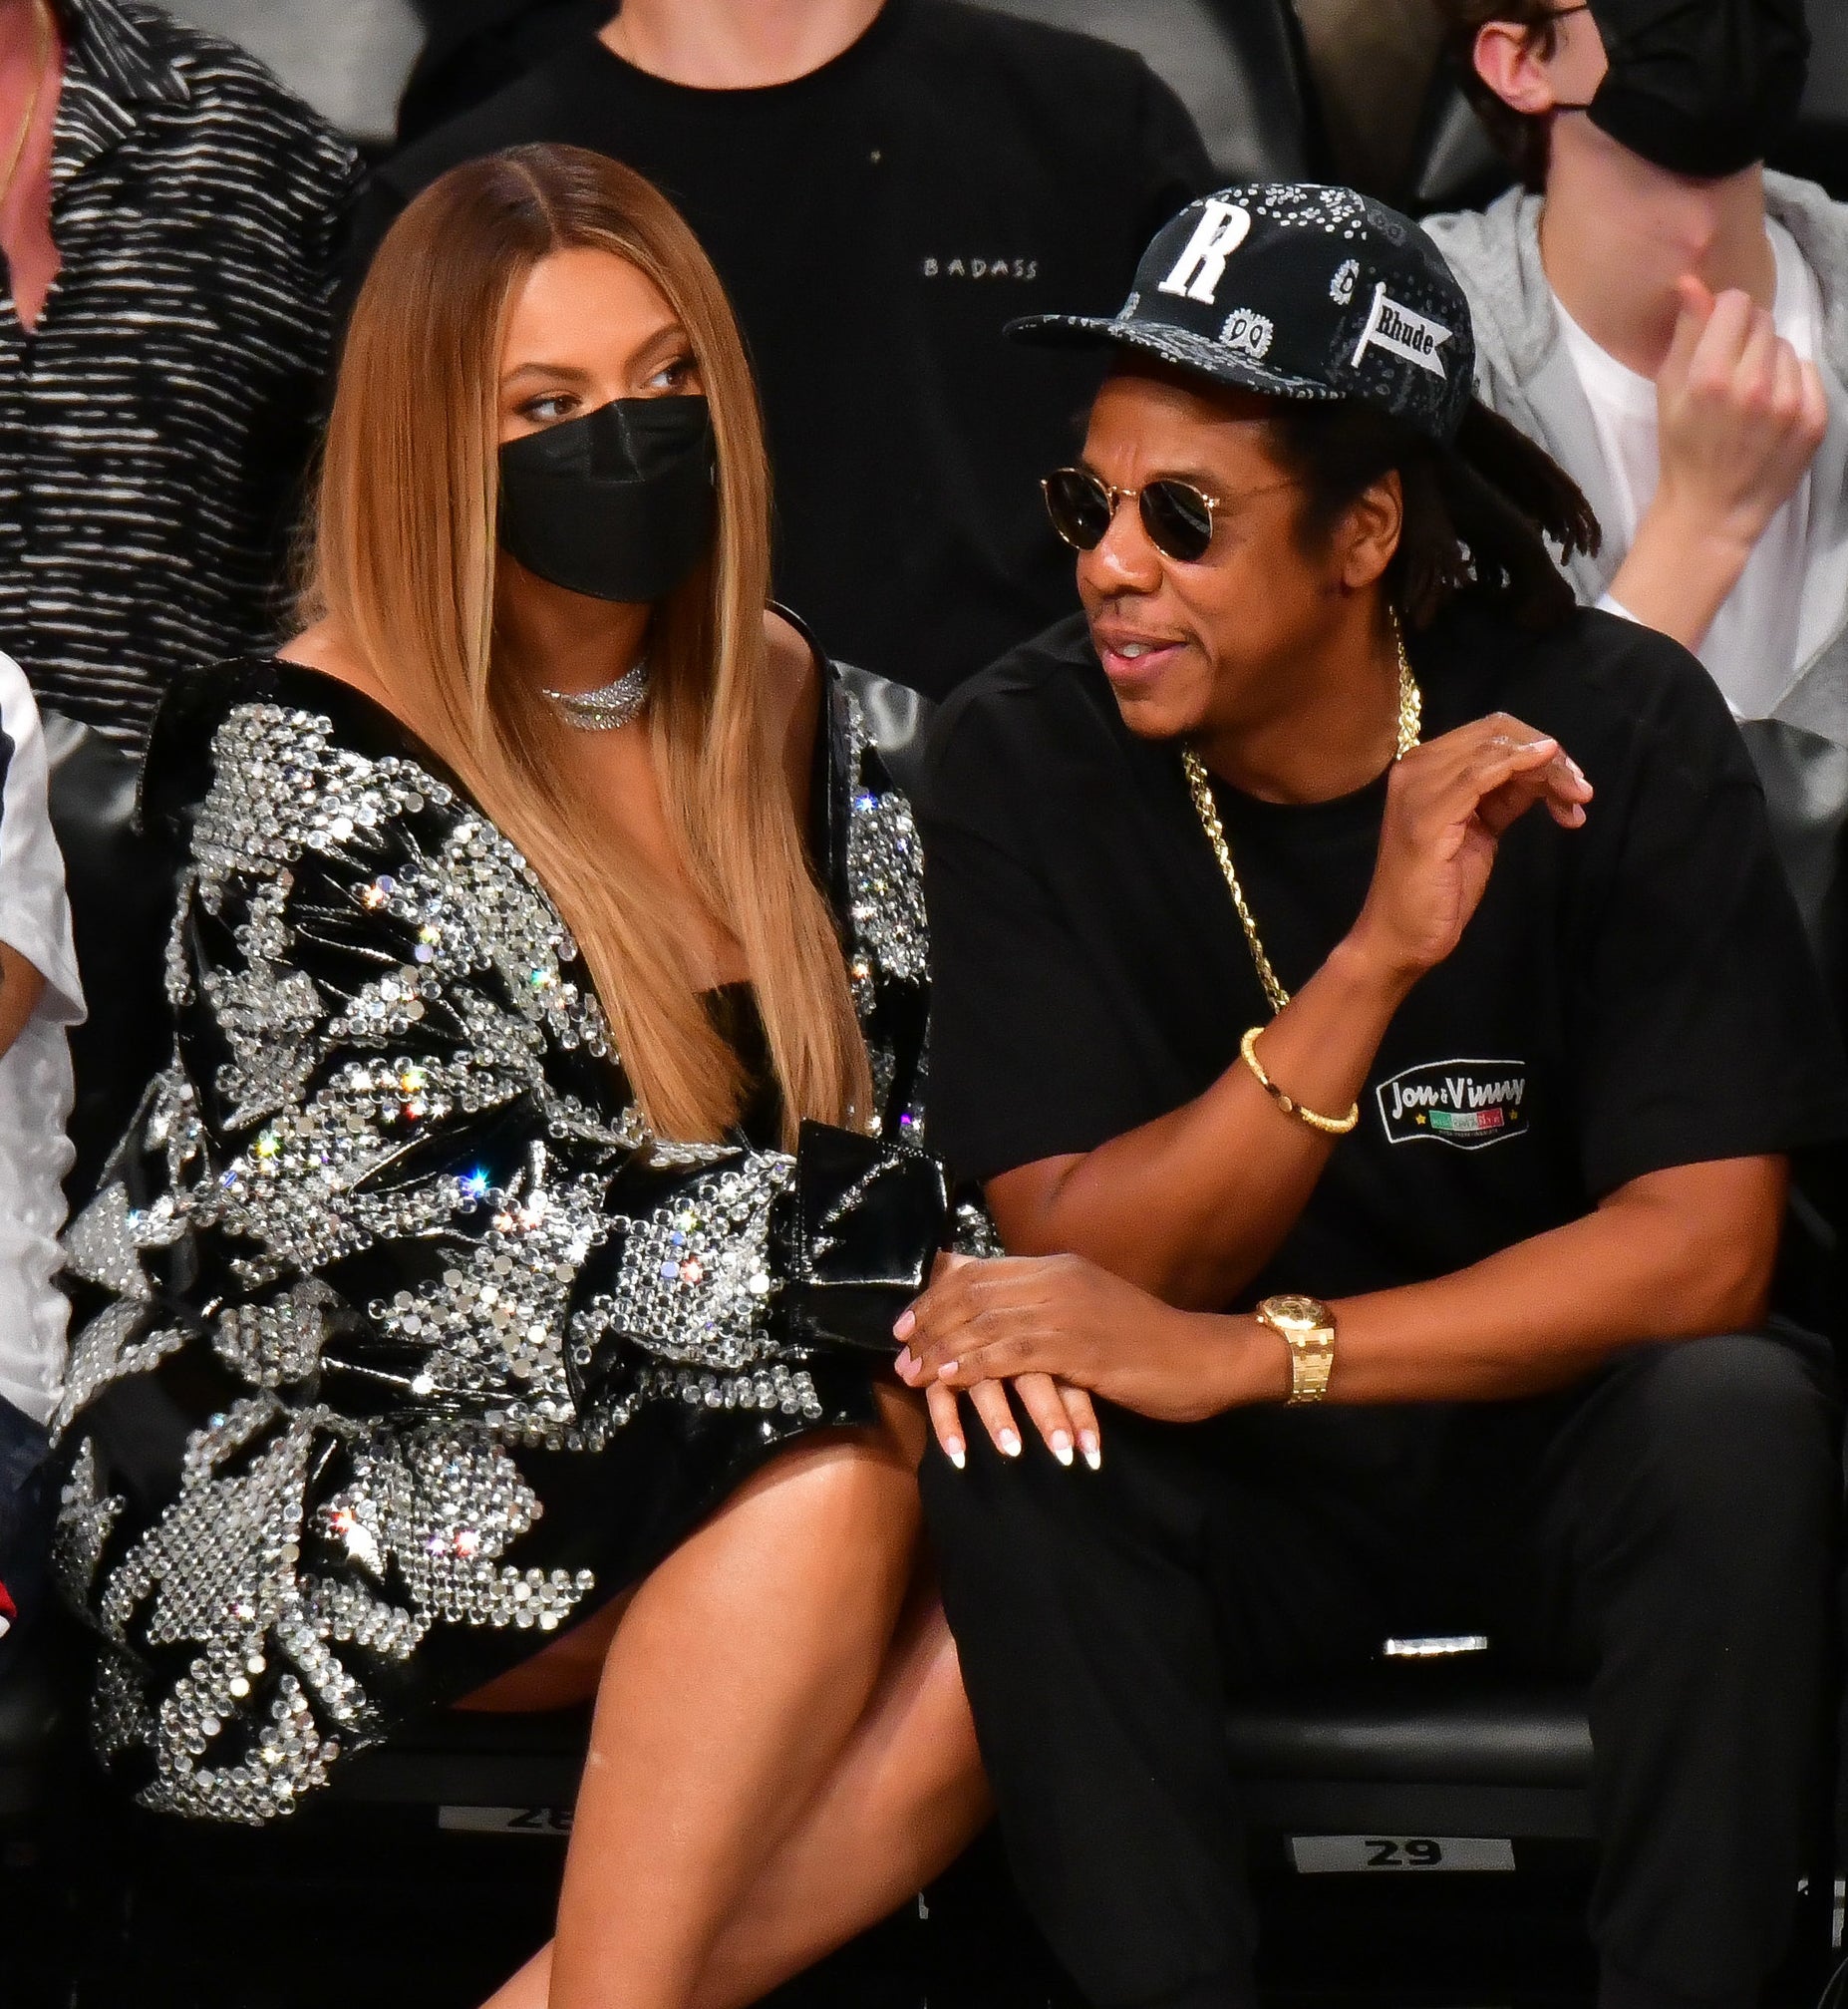 Beyonce and Jay-Z at a sports game